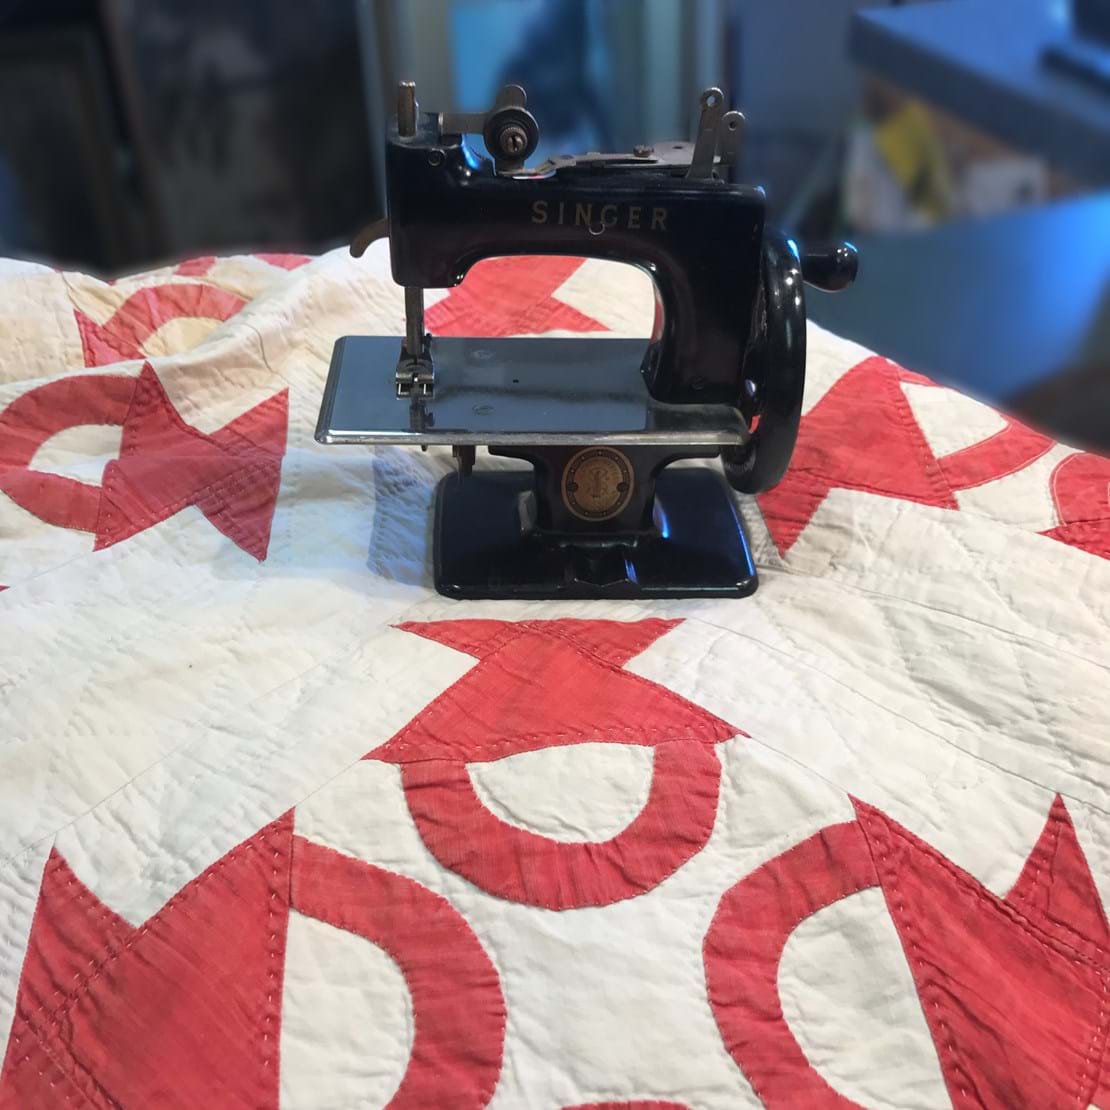 What a find! 1950s Singer hand cranked sewing machine.